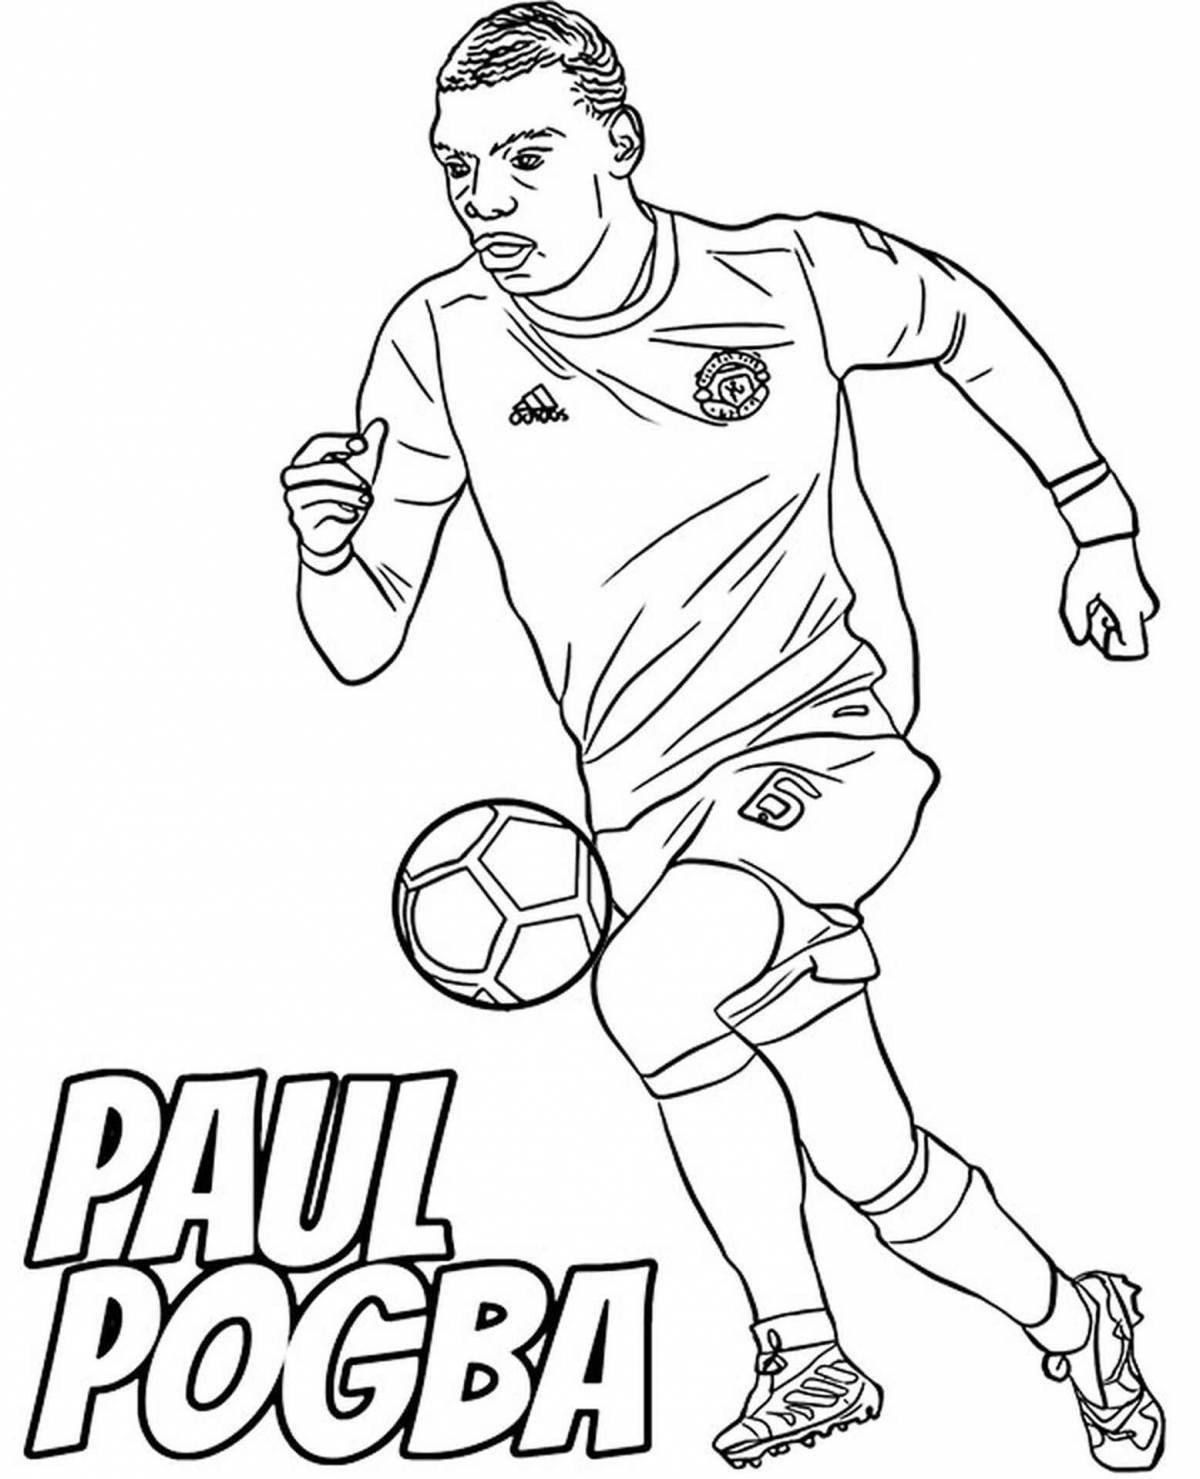 Modric fairytale coloring page